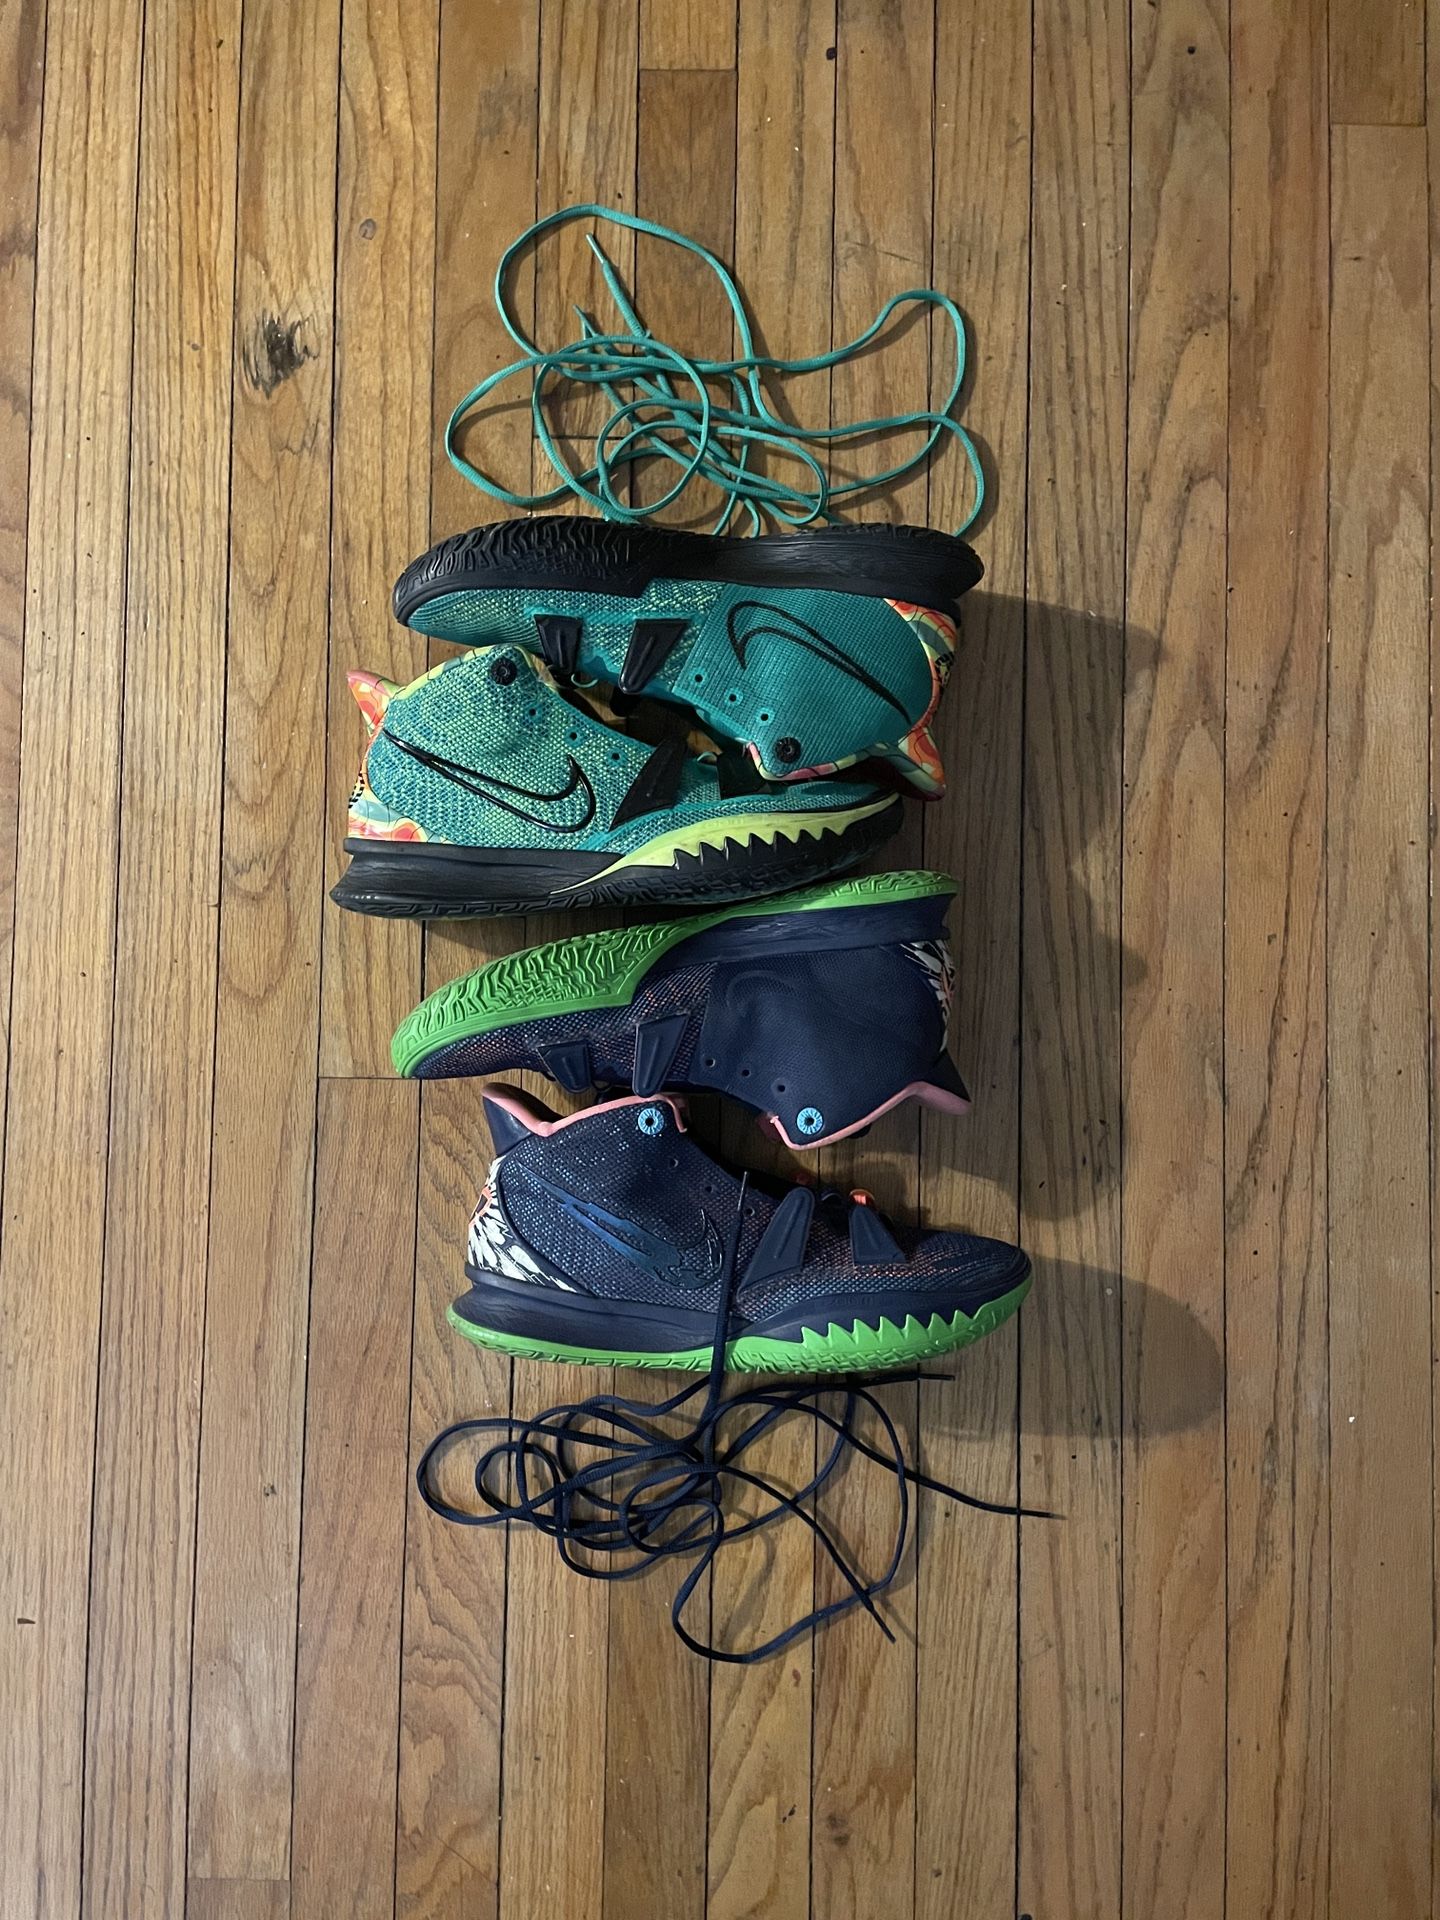 Kyrie 7’s Size 11 (for Both Pairs)